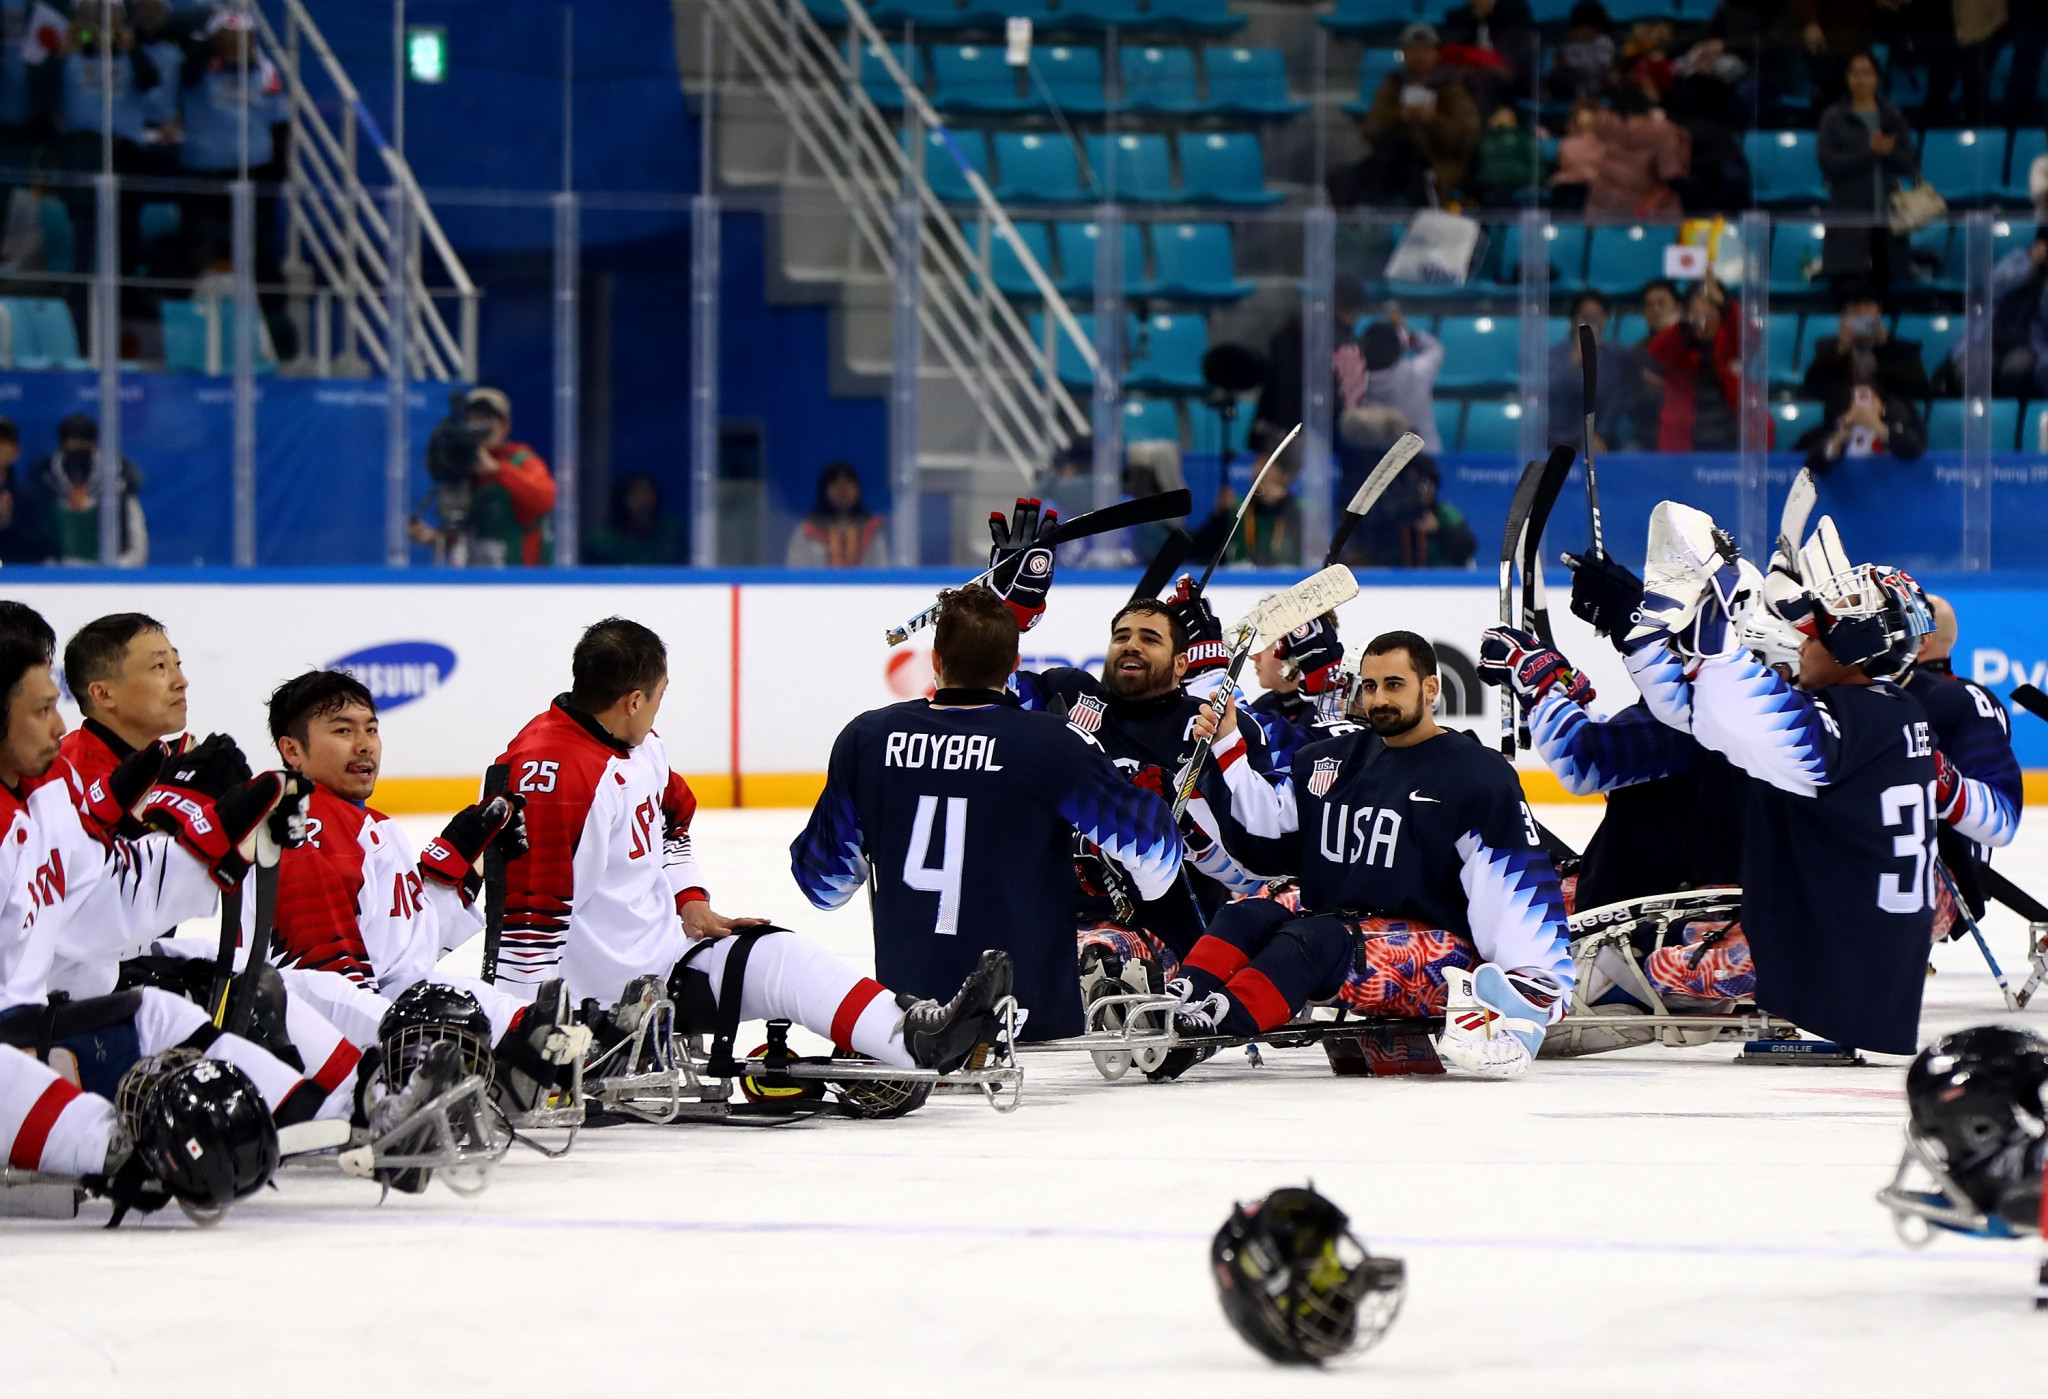 Defending champions the United States thrashed Japan 10-0 in Group B of the ice hockey tournament ©Getty Images